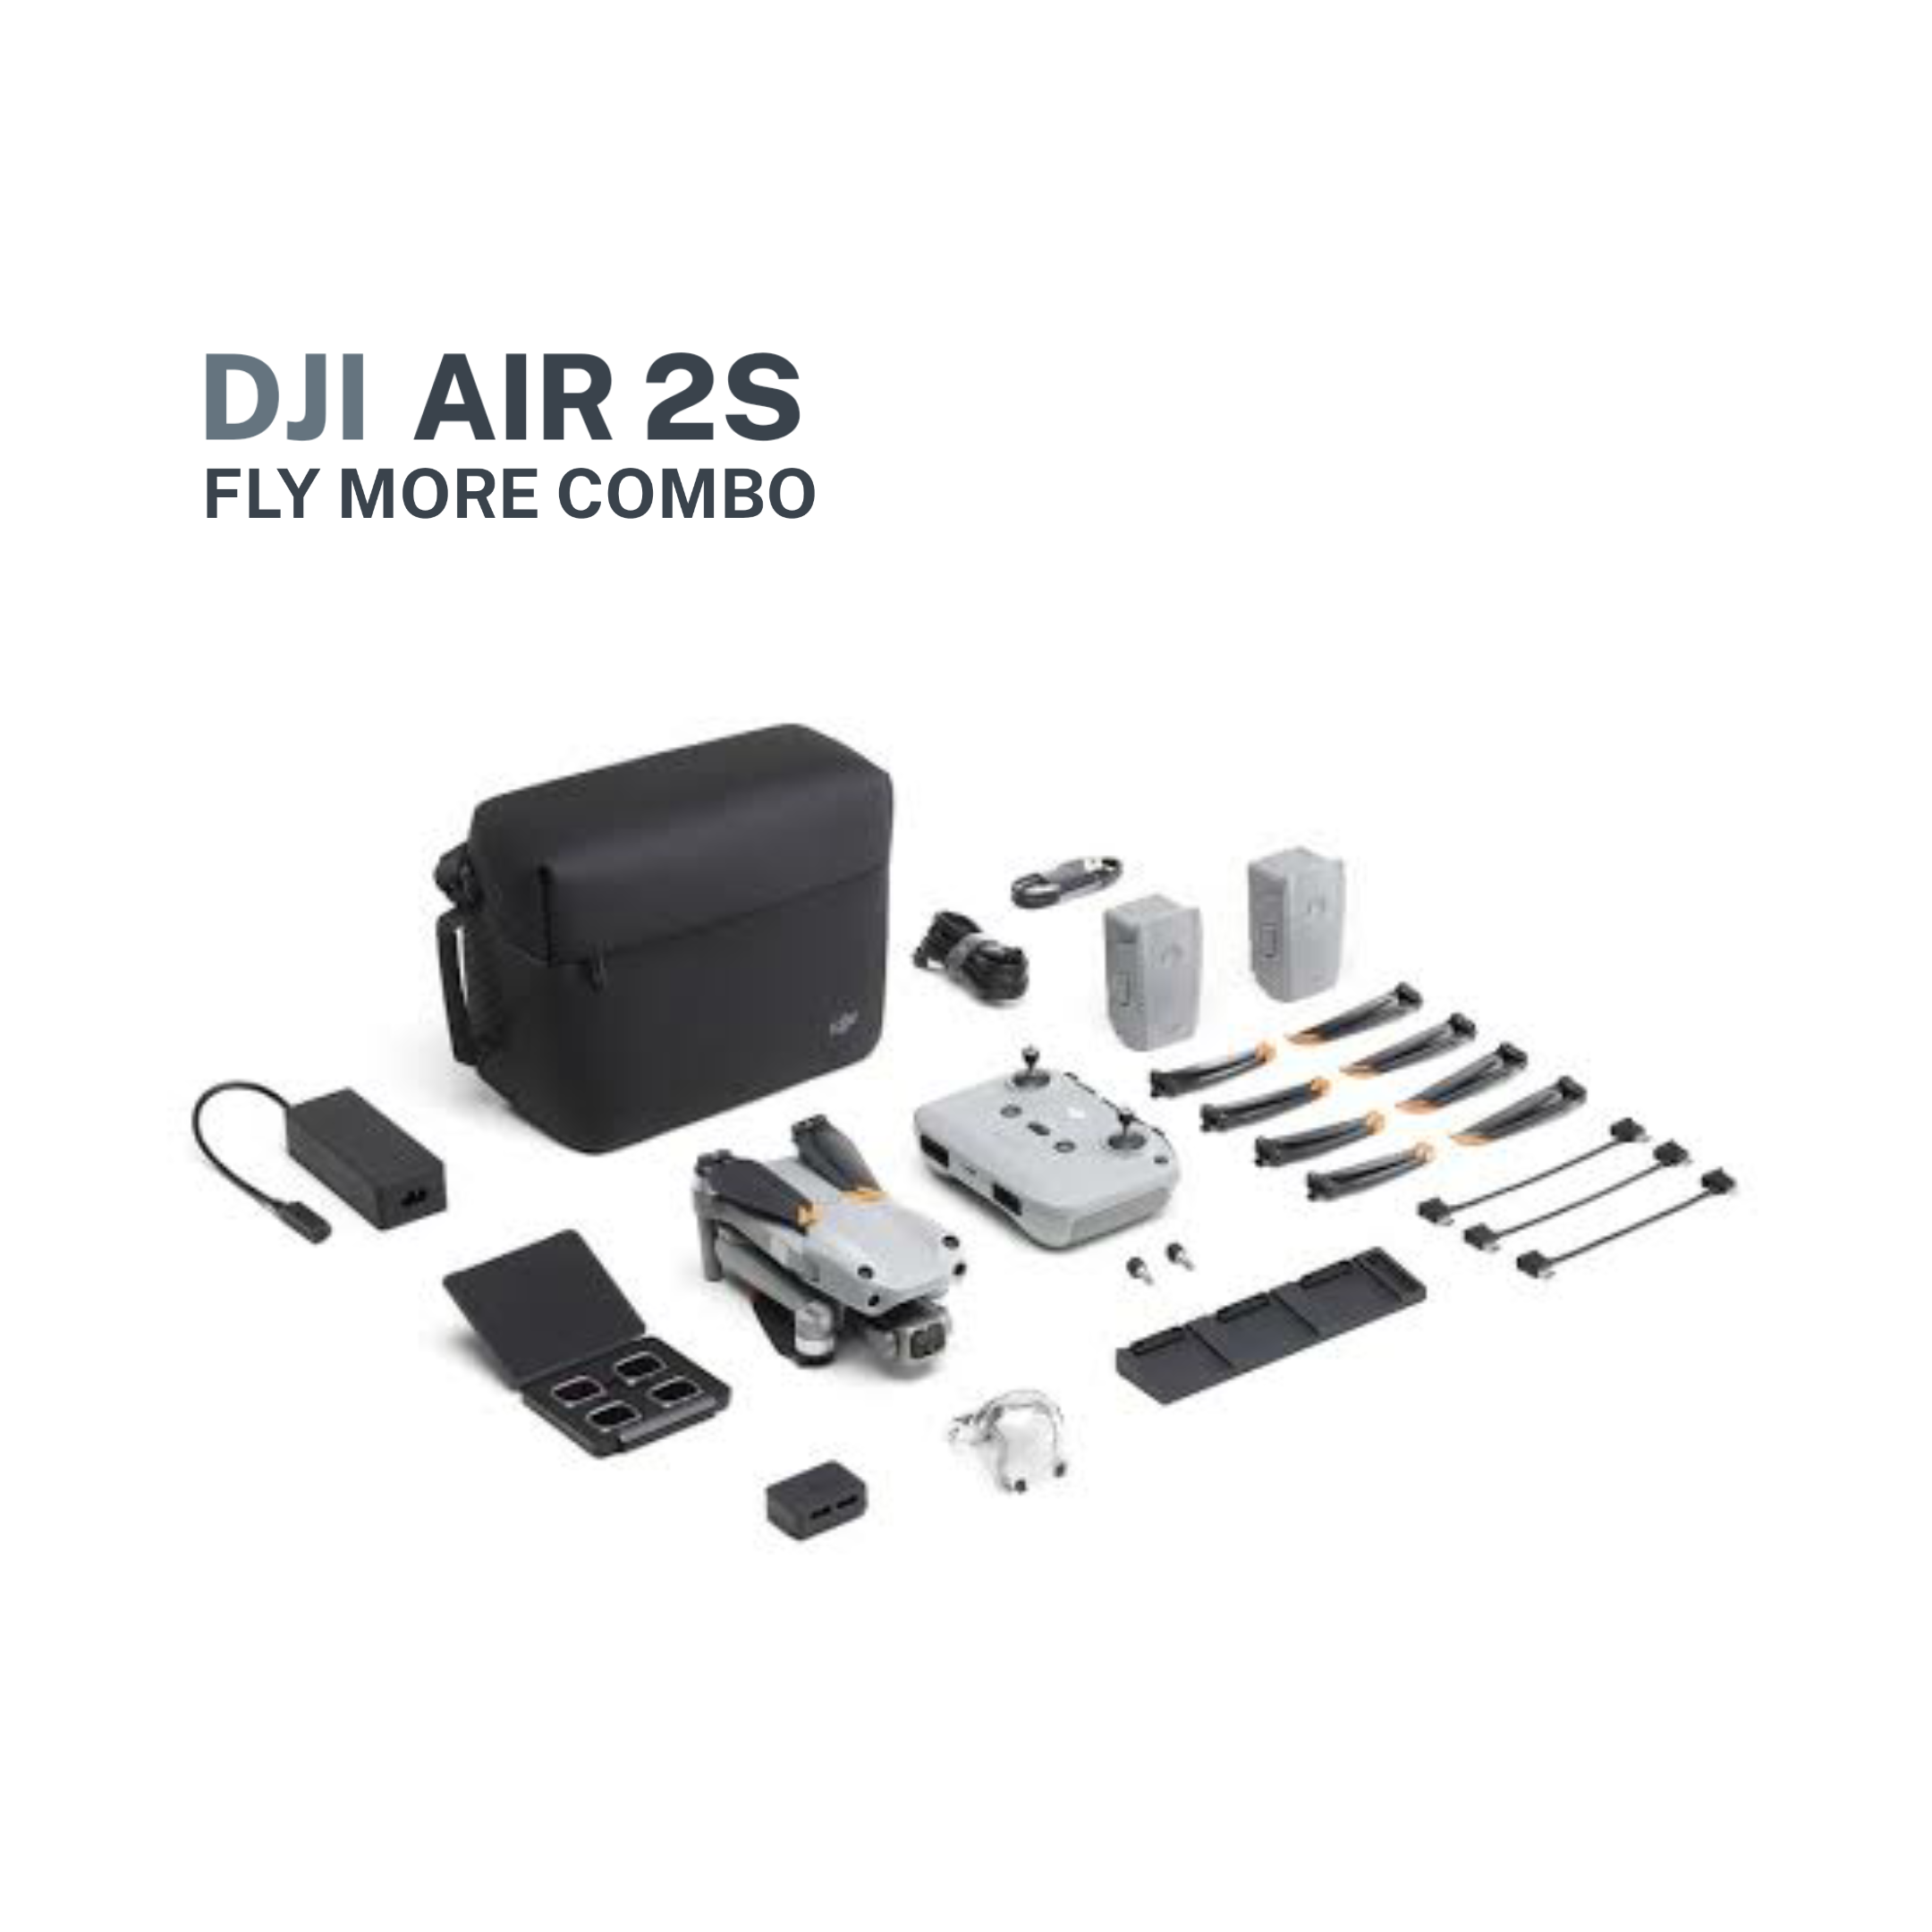 DJI Air 2S Fly More Combo with FREE 64GB SanDisk Extreme Micro SD Card